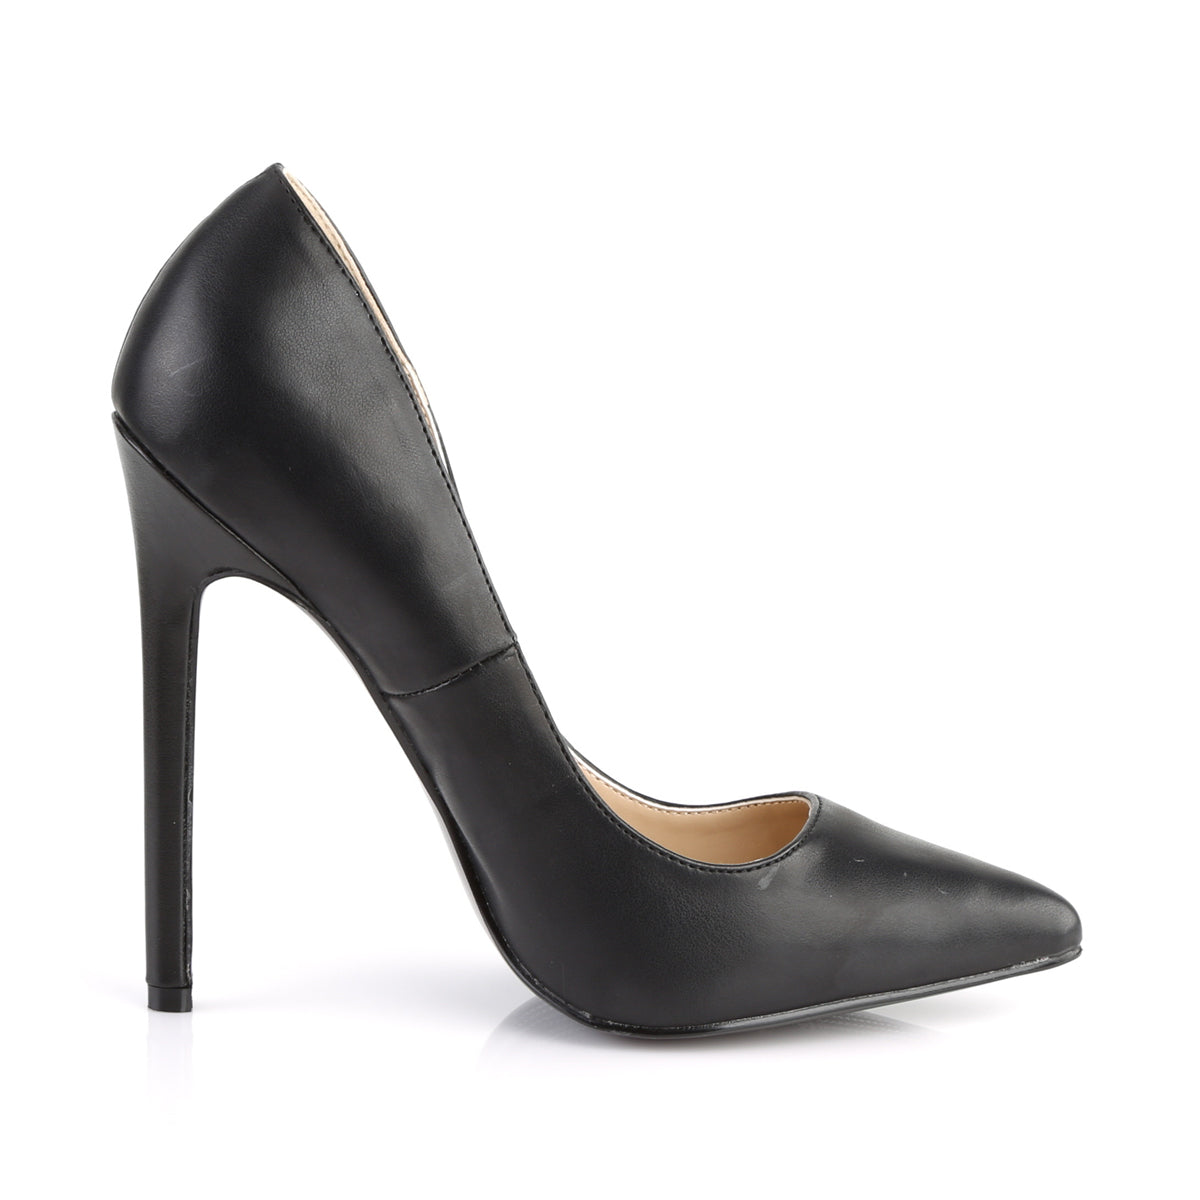 Shoes 5 Inches - Buy Shoes 5 Inches online in India